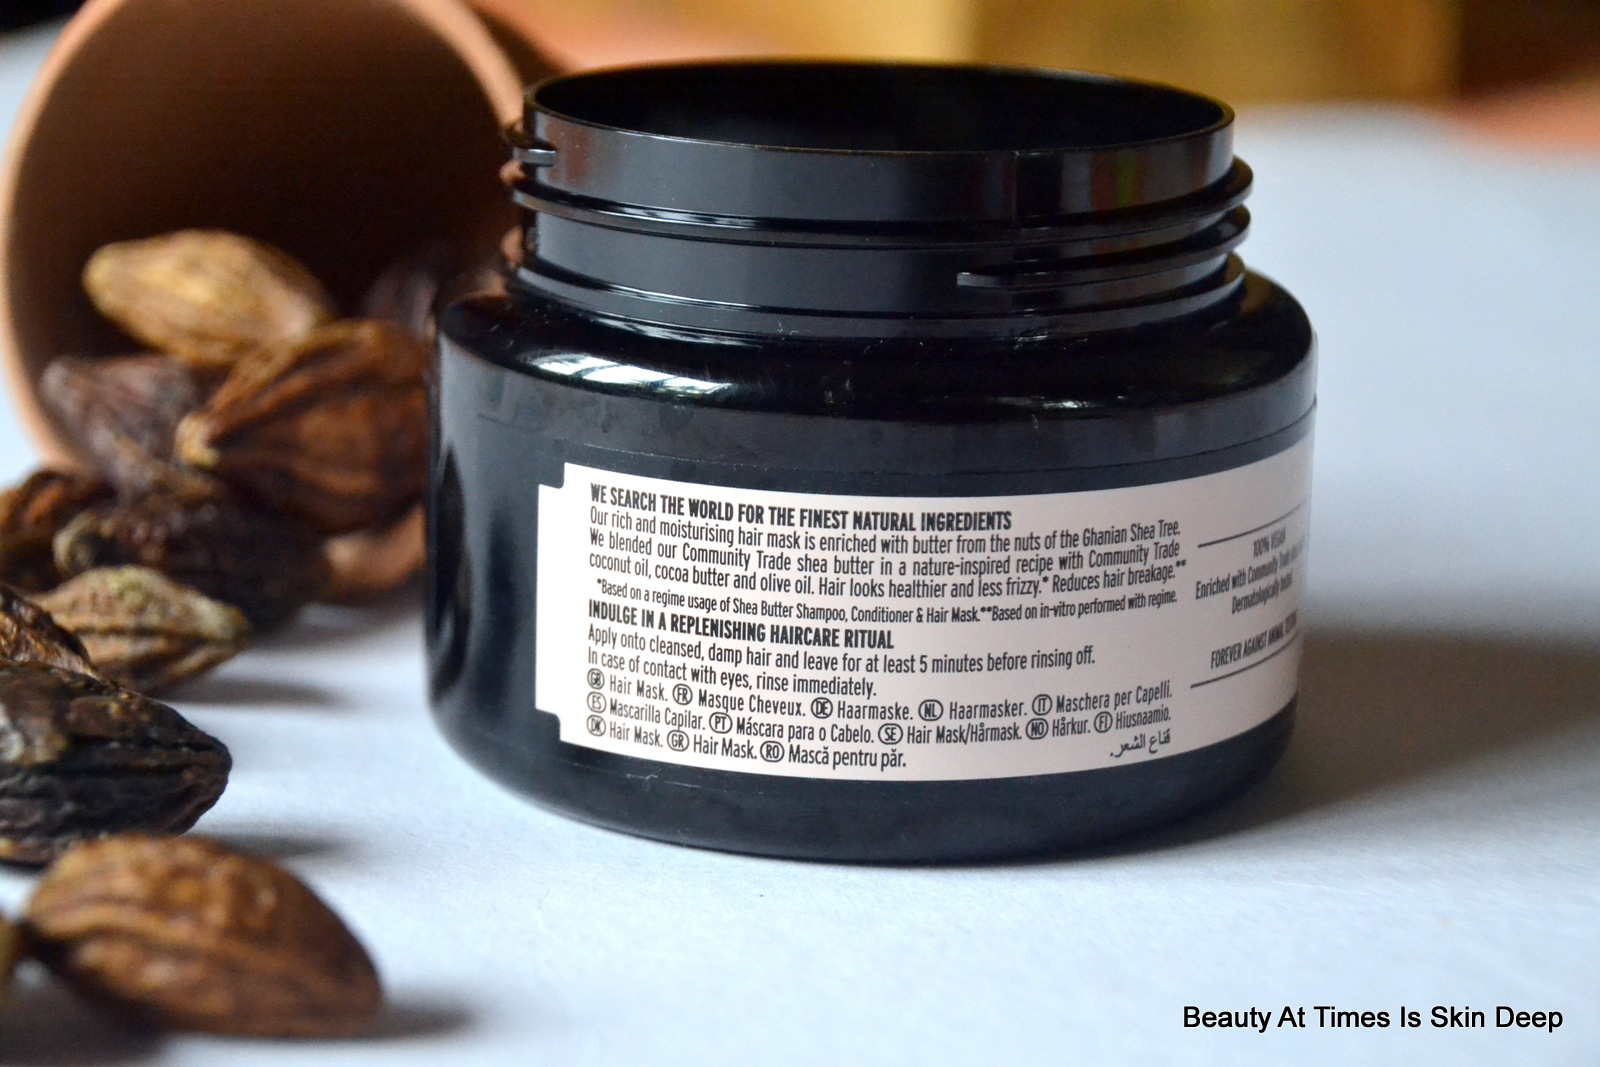 Beauty At Times is Skin Deep: The Body Shop Shea Butter Richly Replenishing Hair  Mask